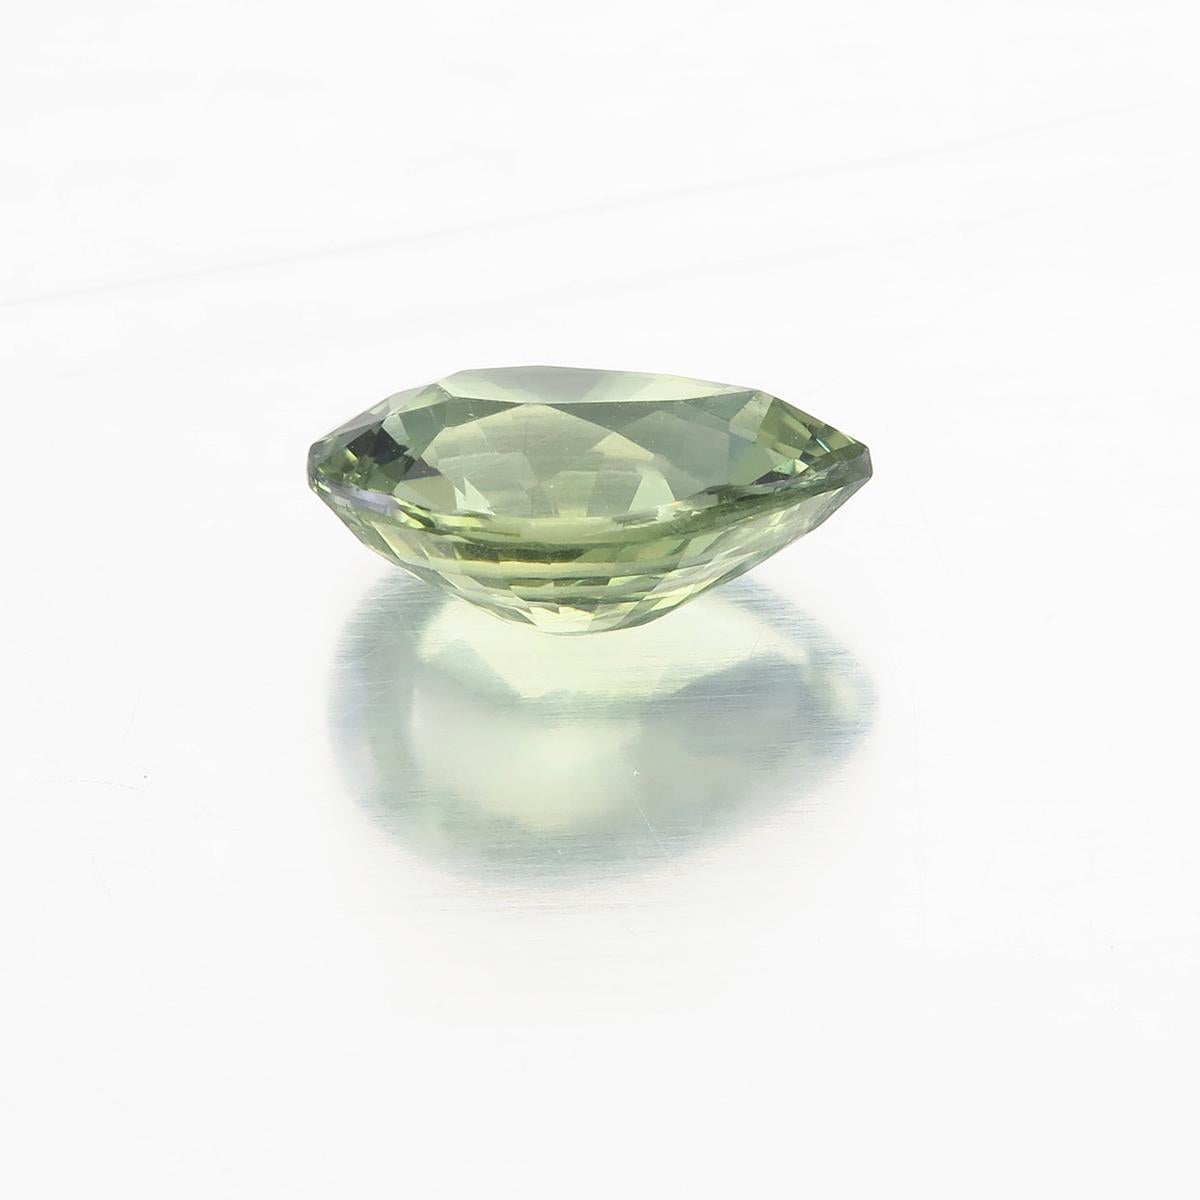 Pear Cut 1.48 Carat Yellowish Green Sapphire from Madagascar Lotus Certified For Sale